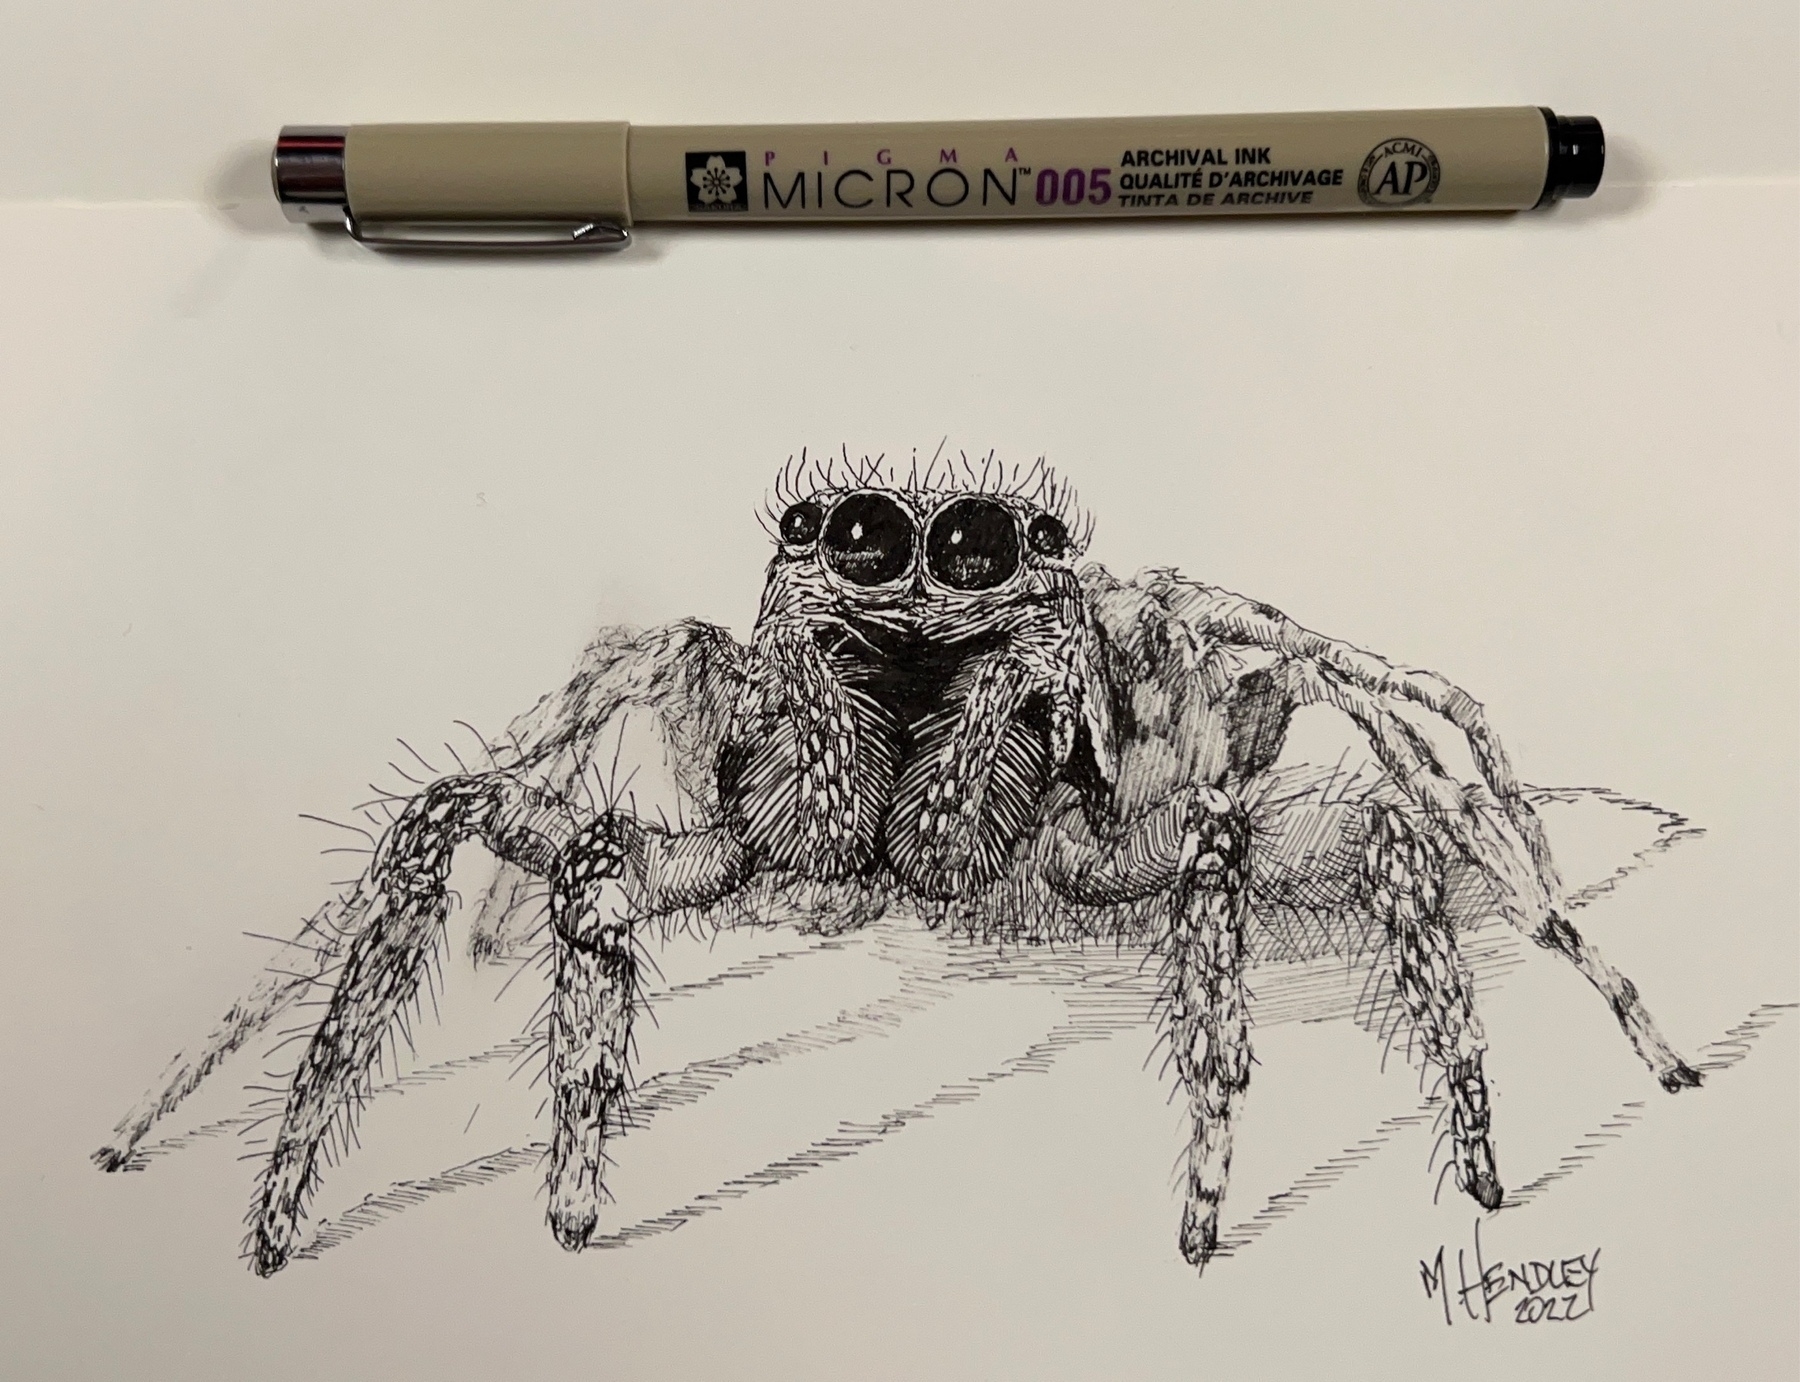 Spider Drawing & Sketches for Kids - Kids Art & Craft